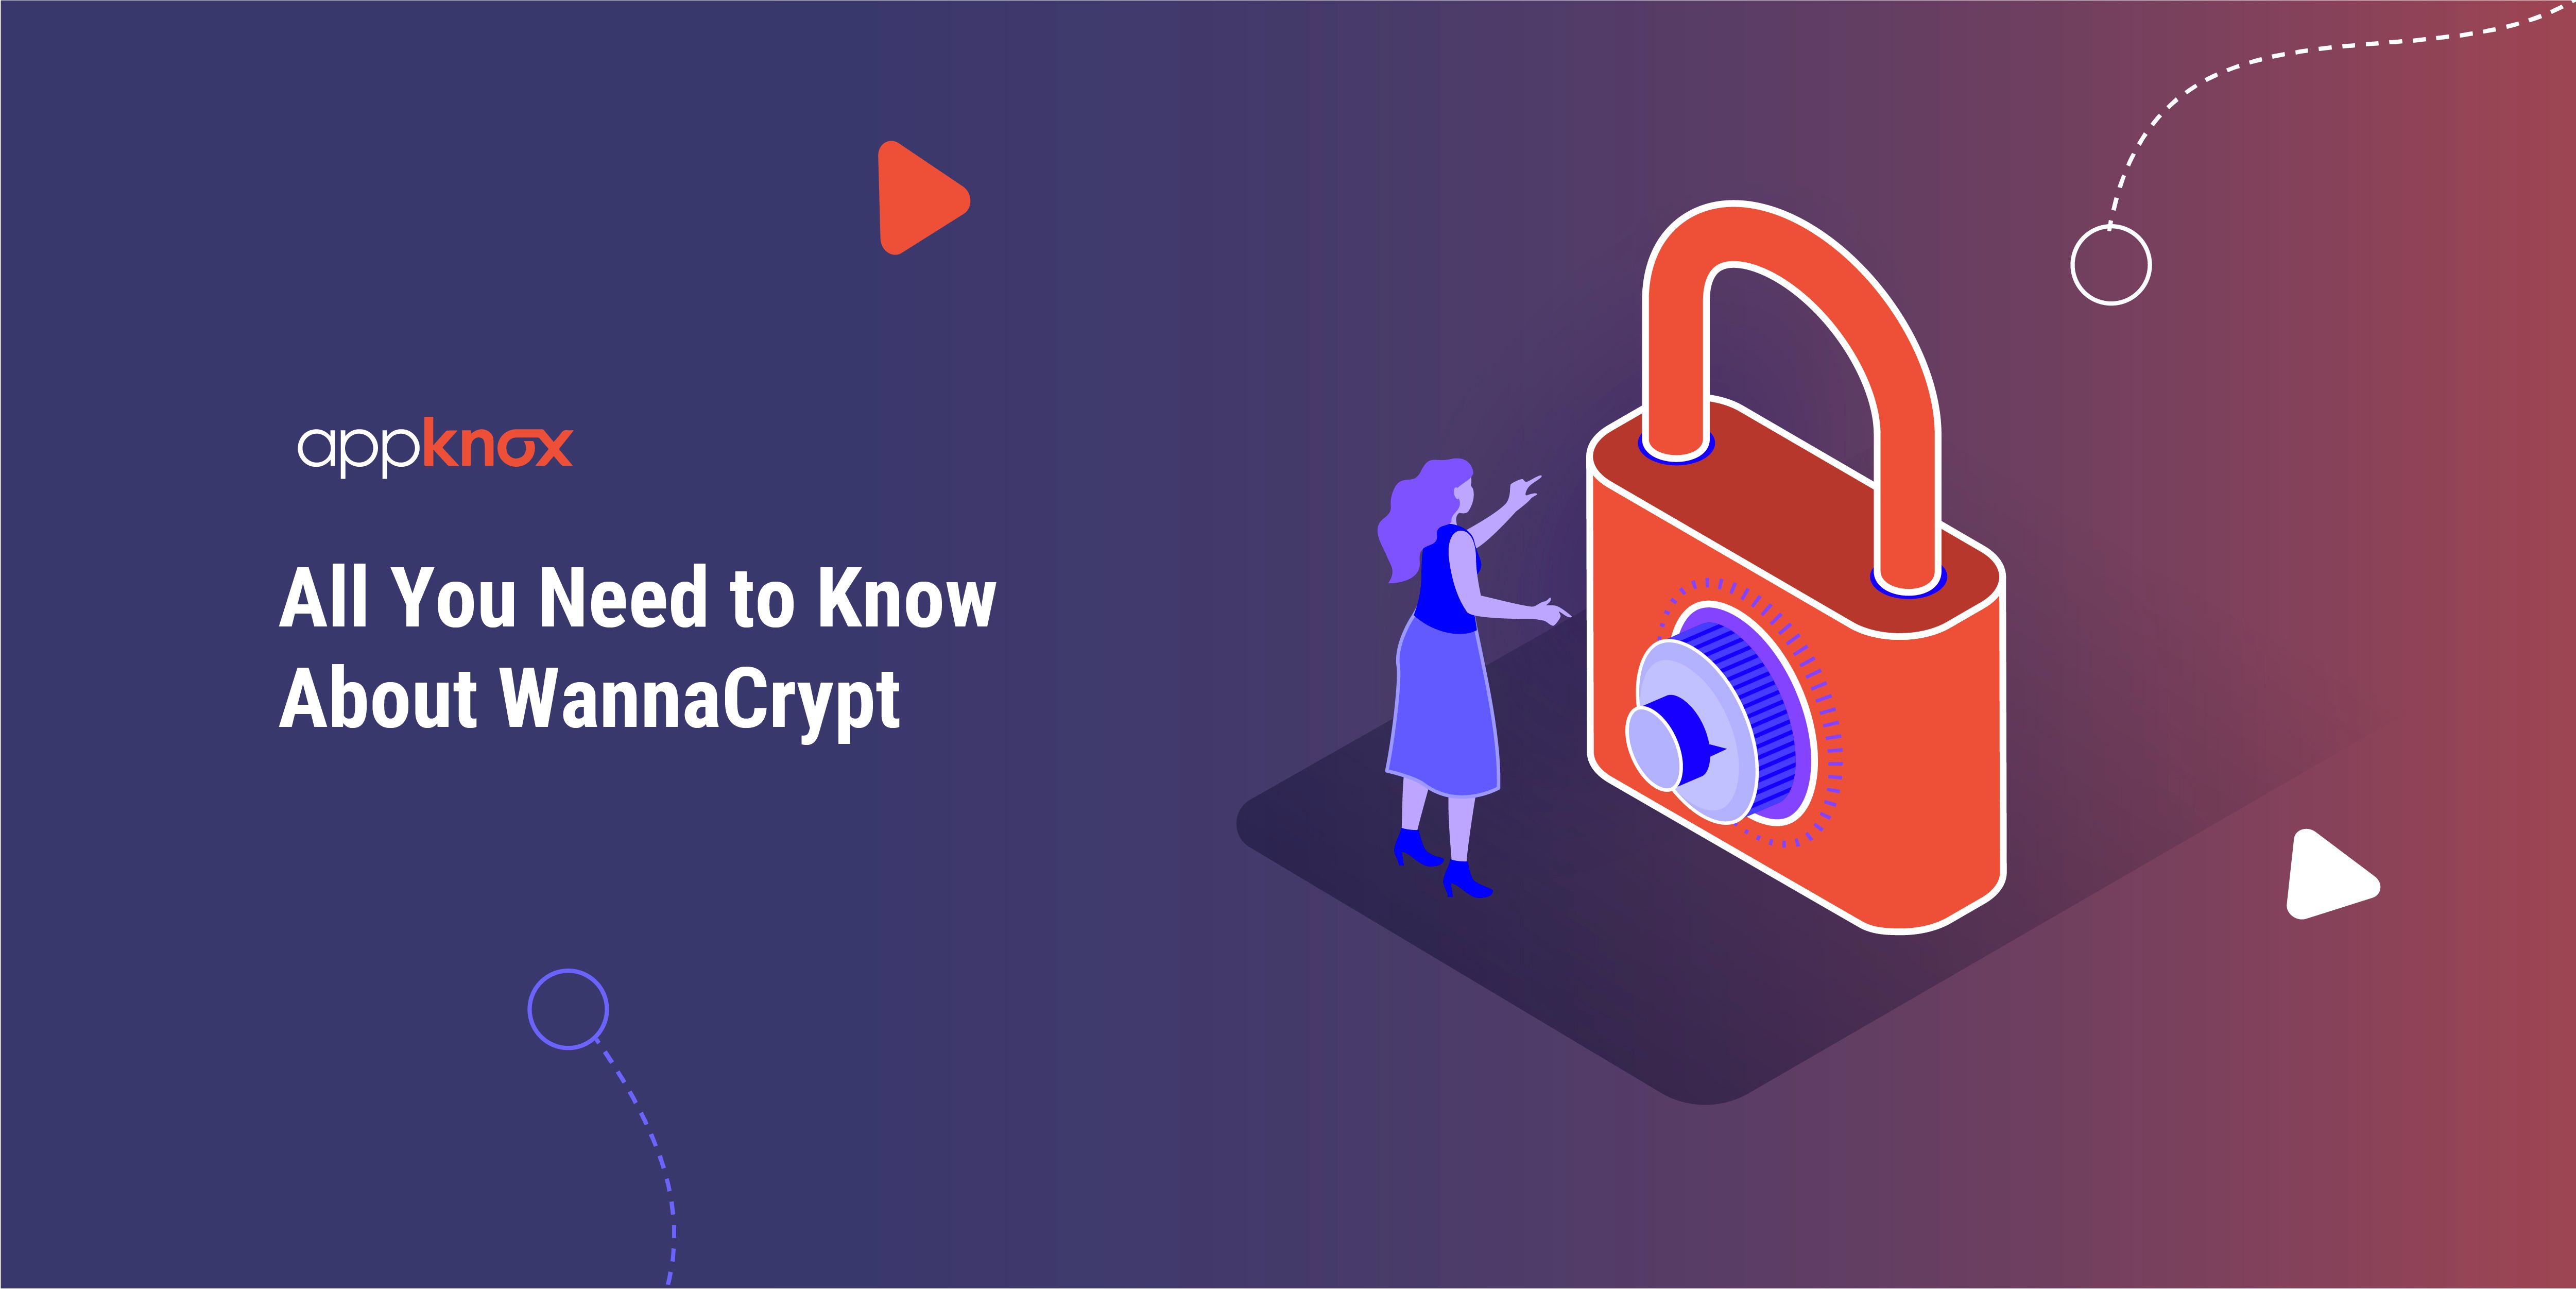 All You Need to Know About WannaCrypt